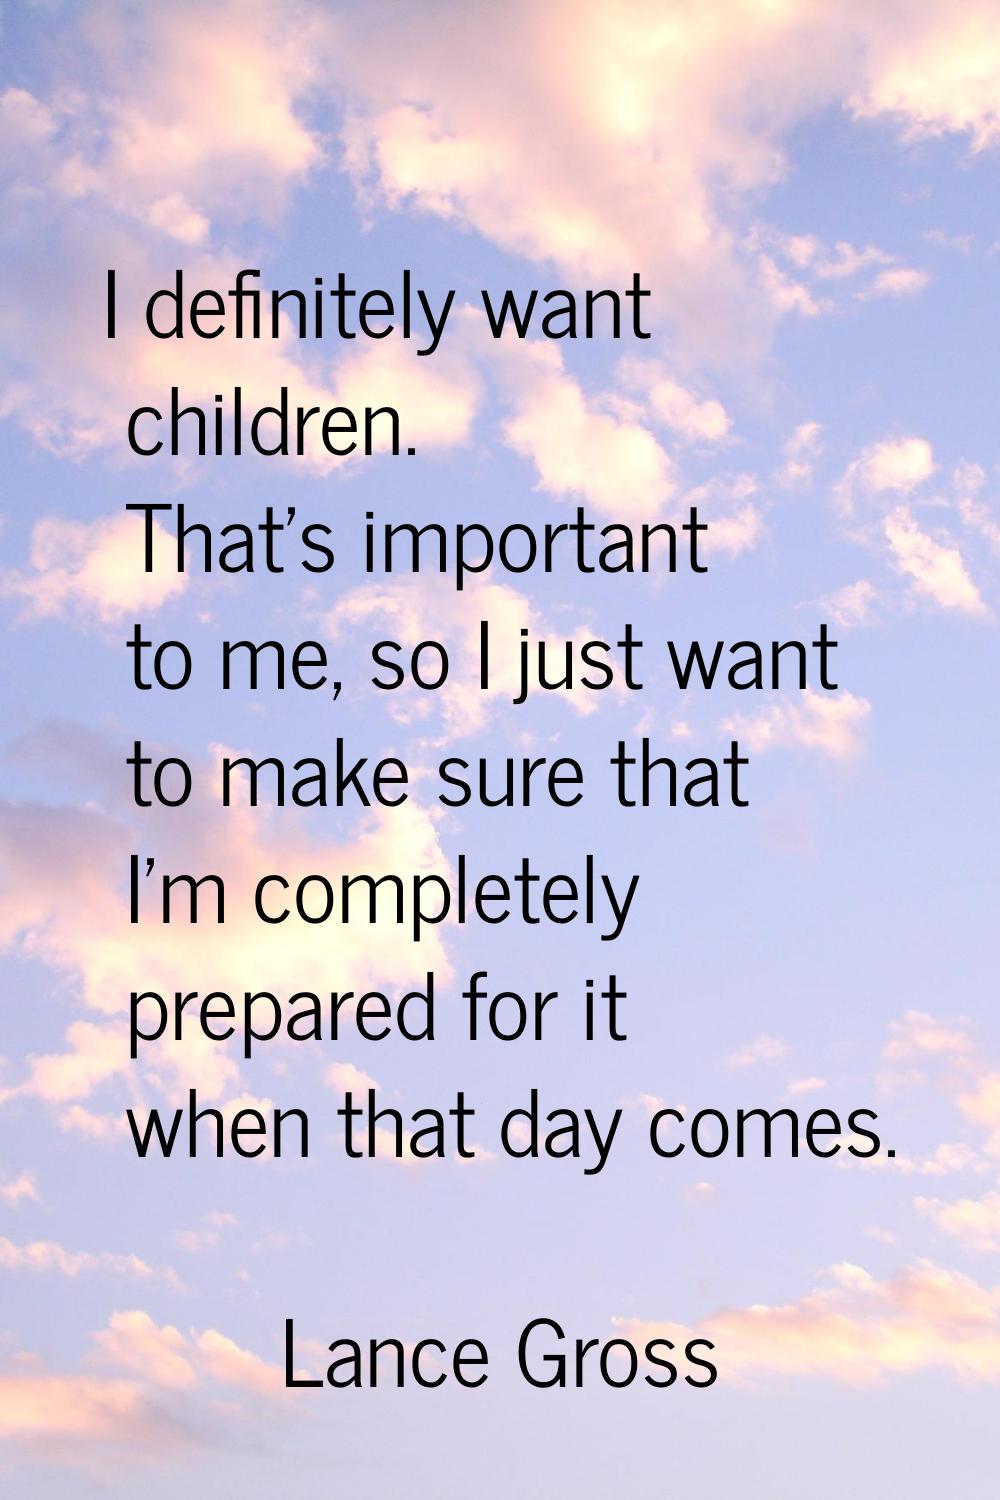 I definitely want children. That's important to me, so I just want to make sure that I'm completely